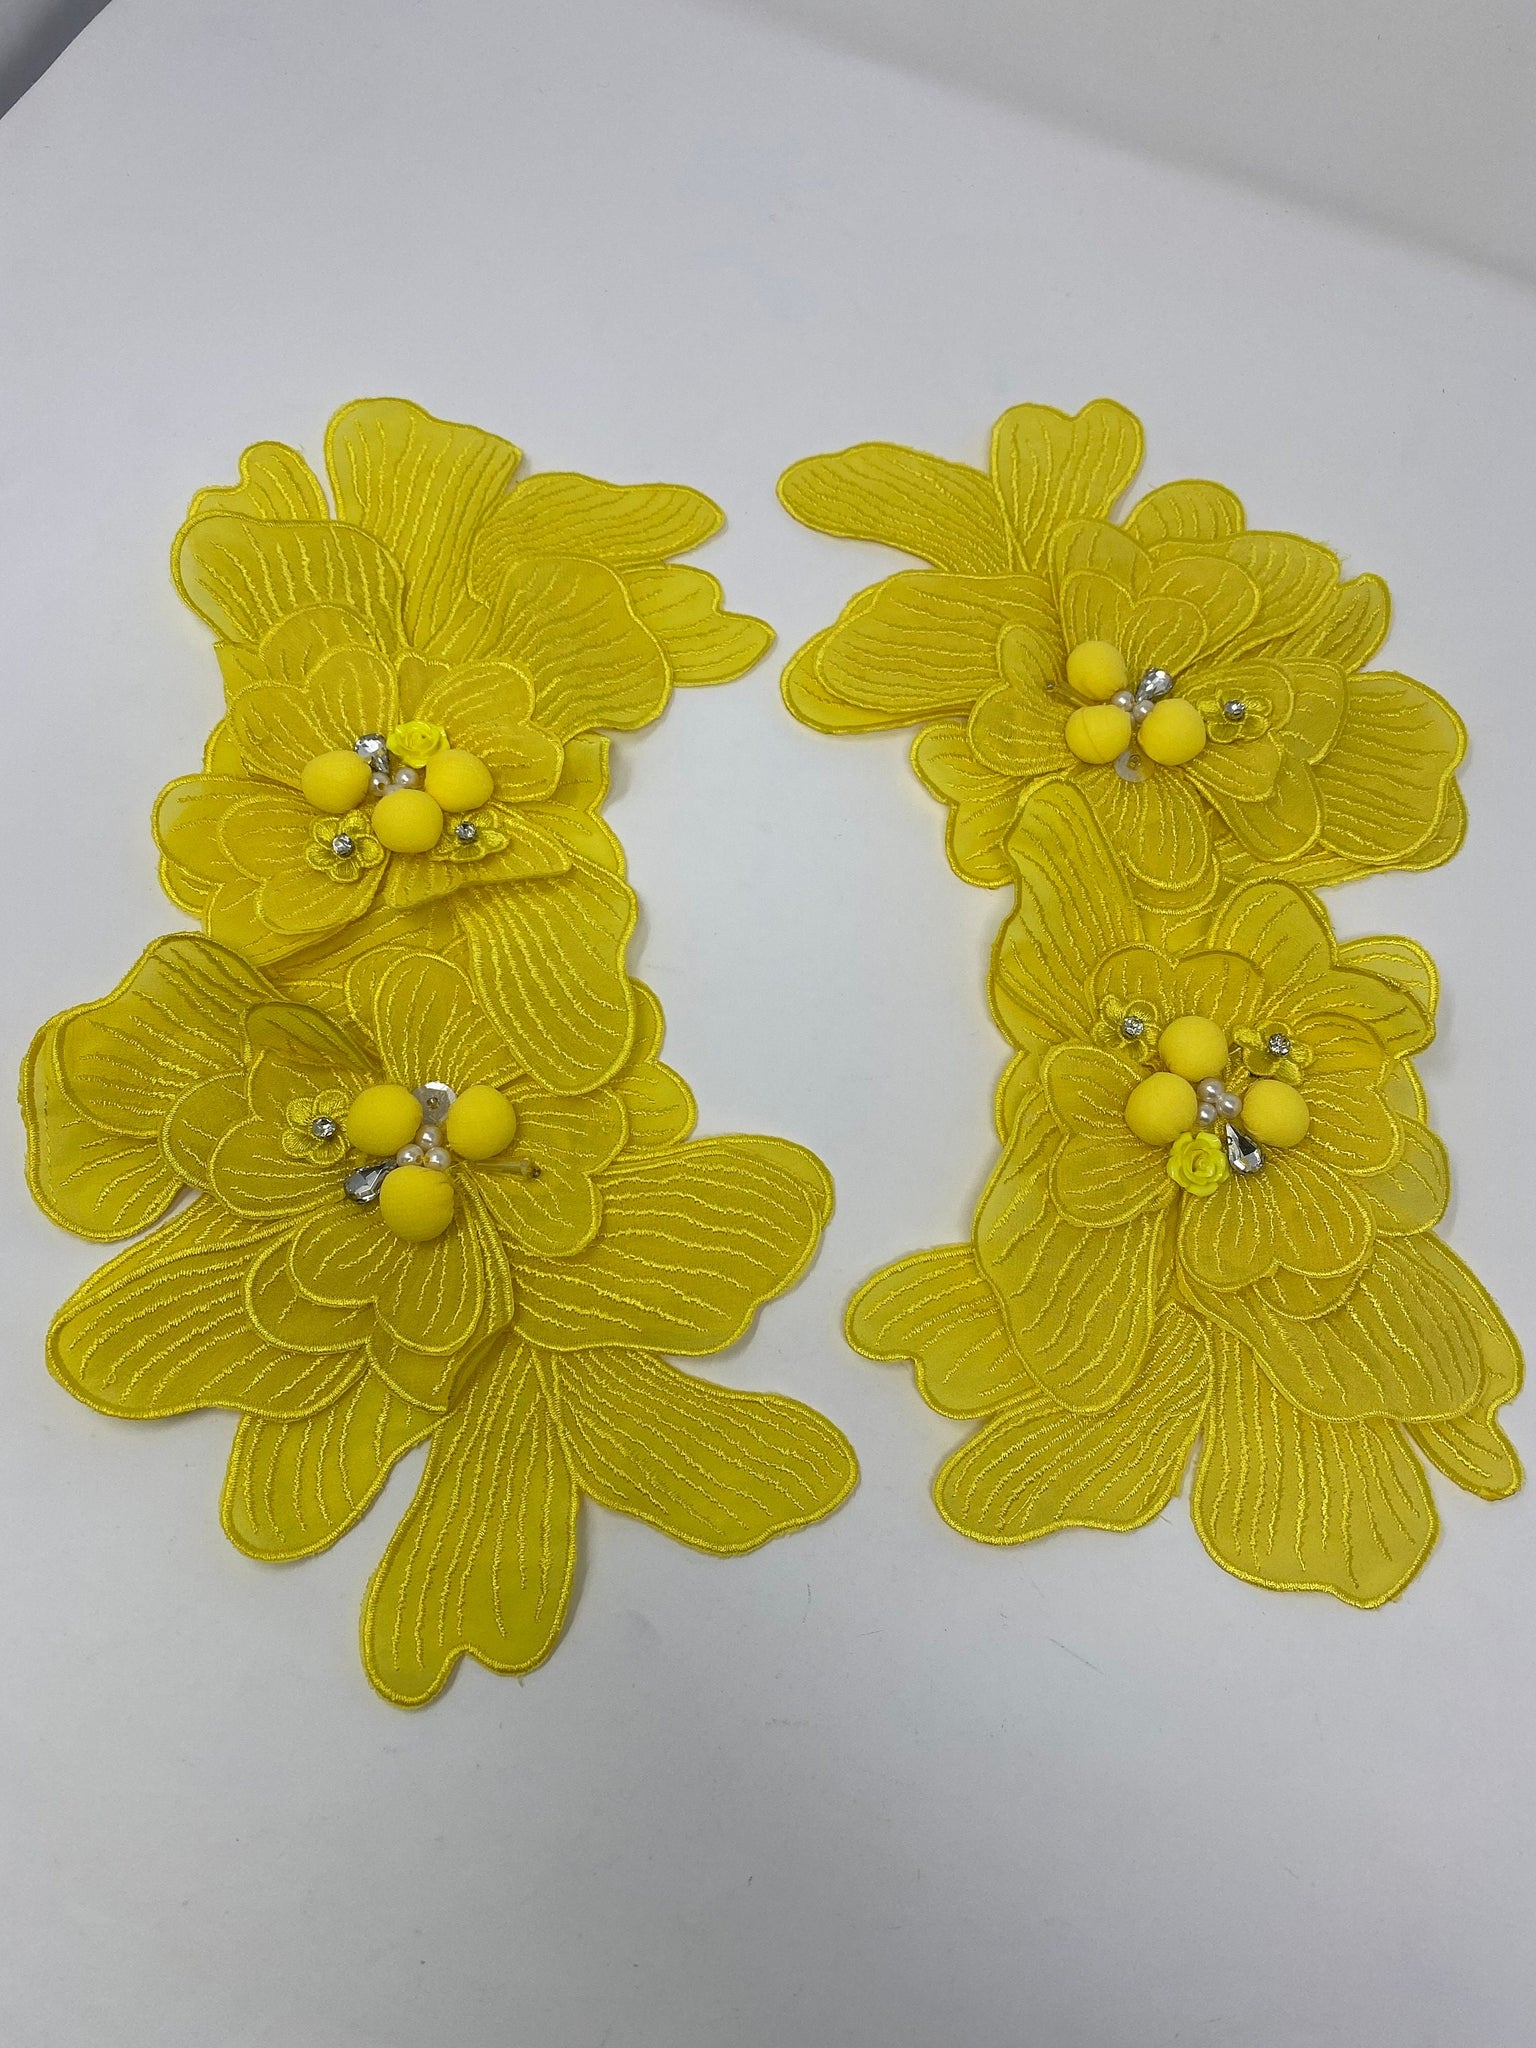 NEW, Exclusive, "Yellow Flower" Size 12'', (sew-on) Fashion Applique, Patch for Denim Jacket, Camo, Sweaters